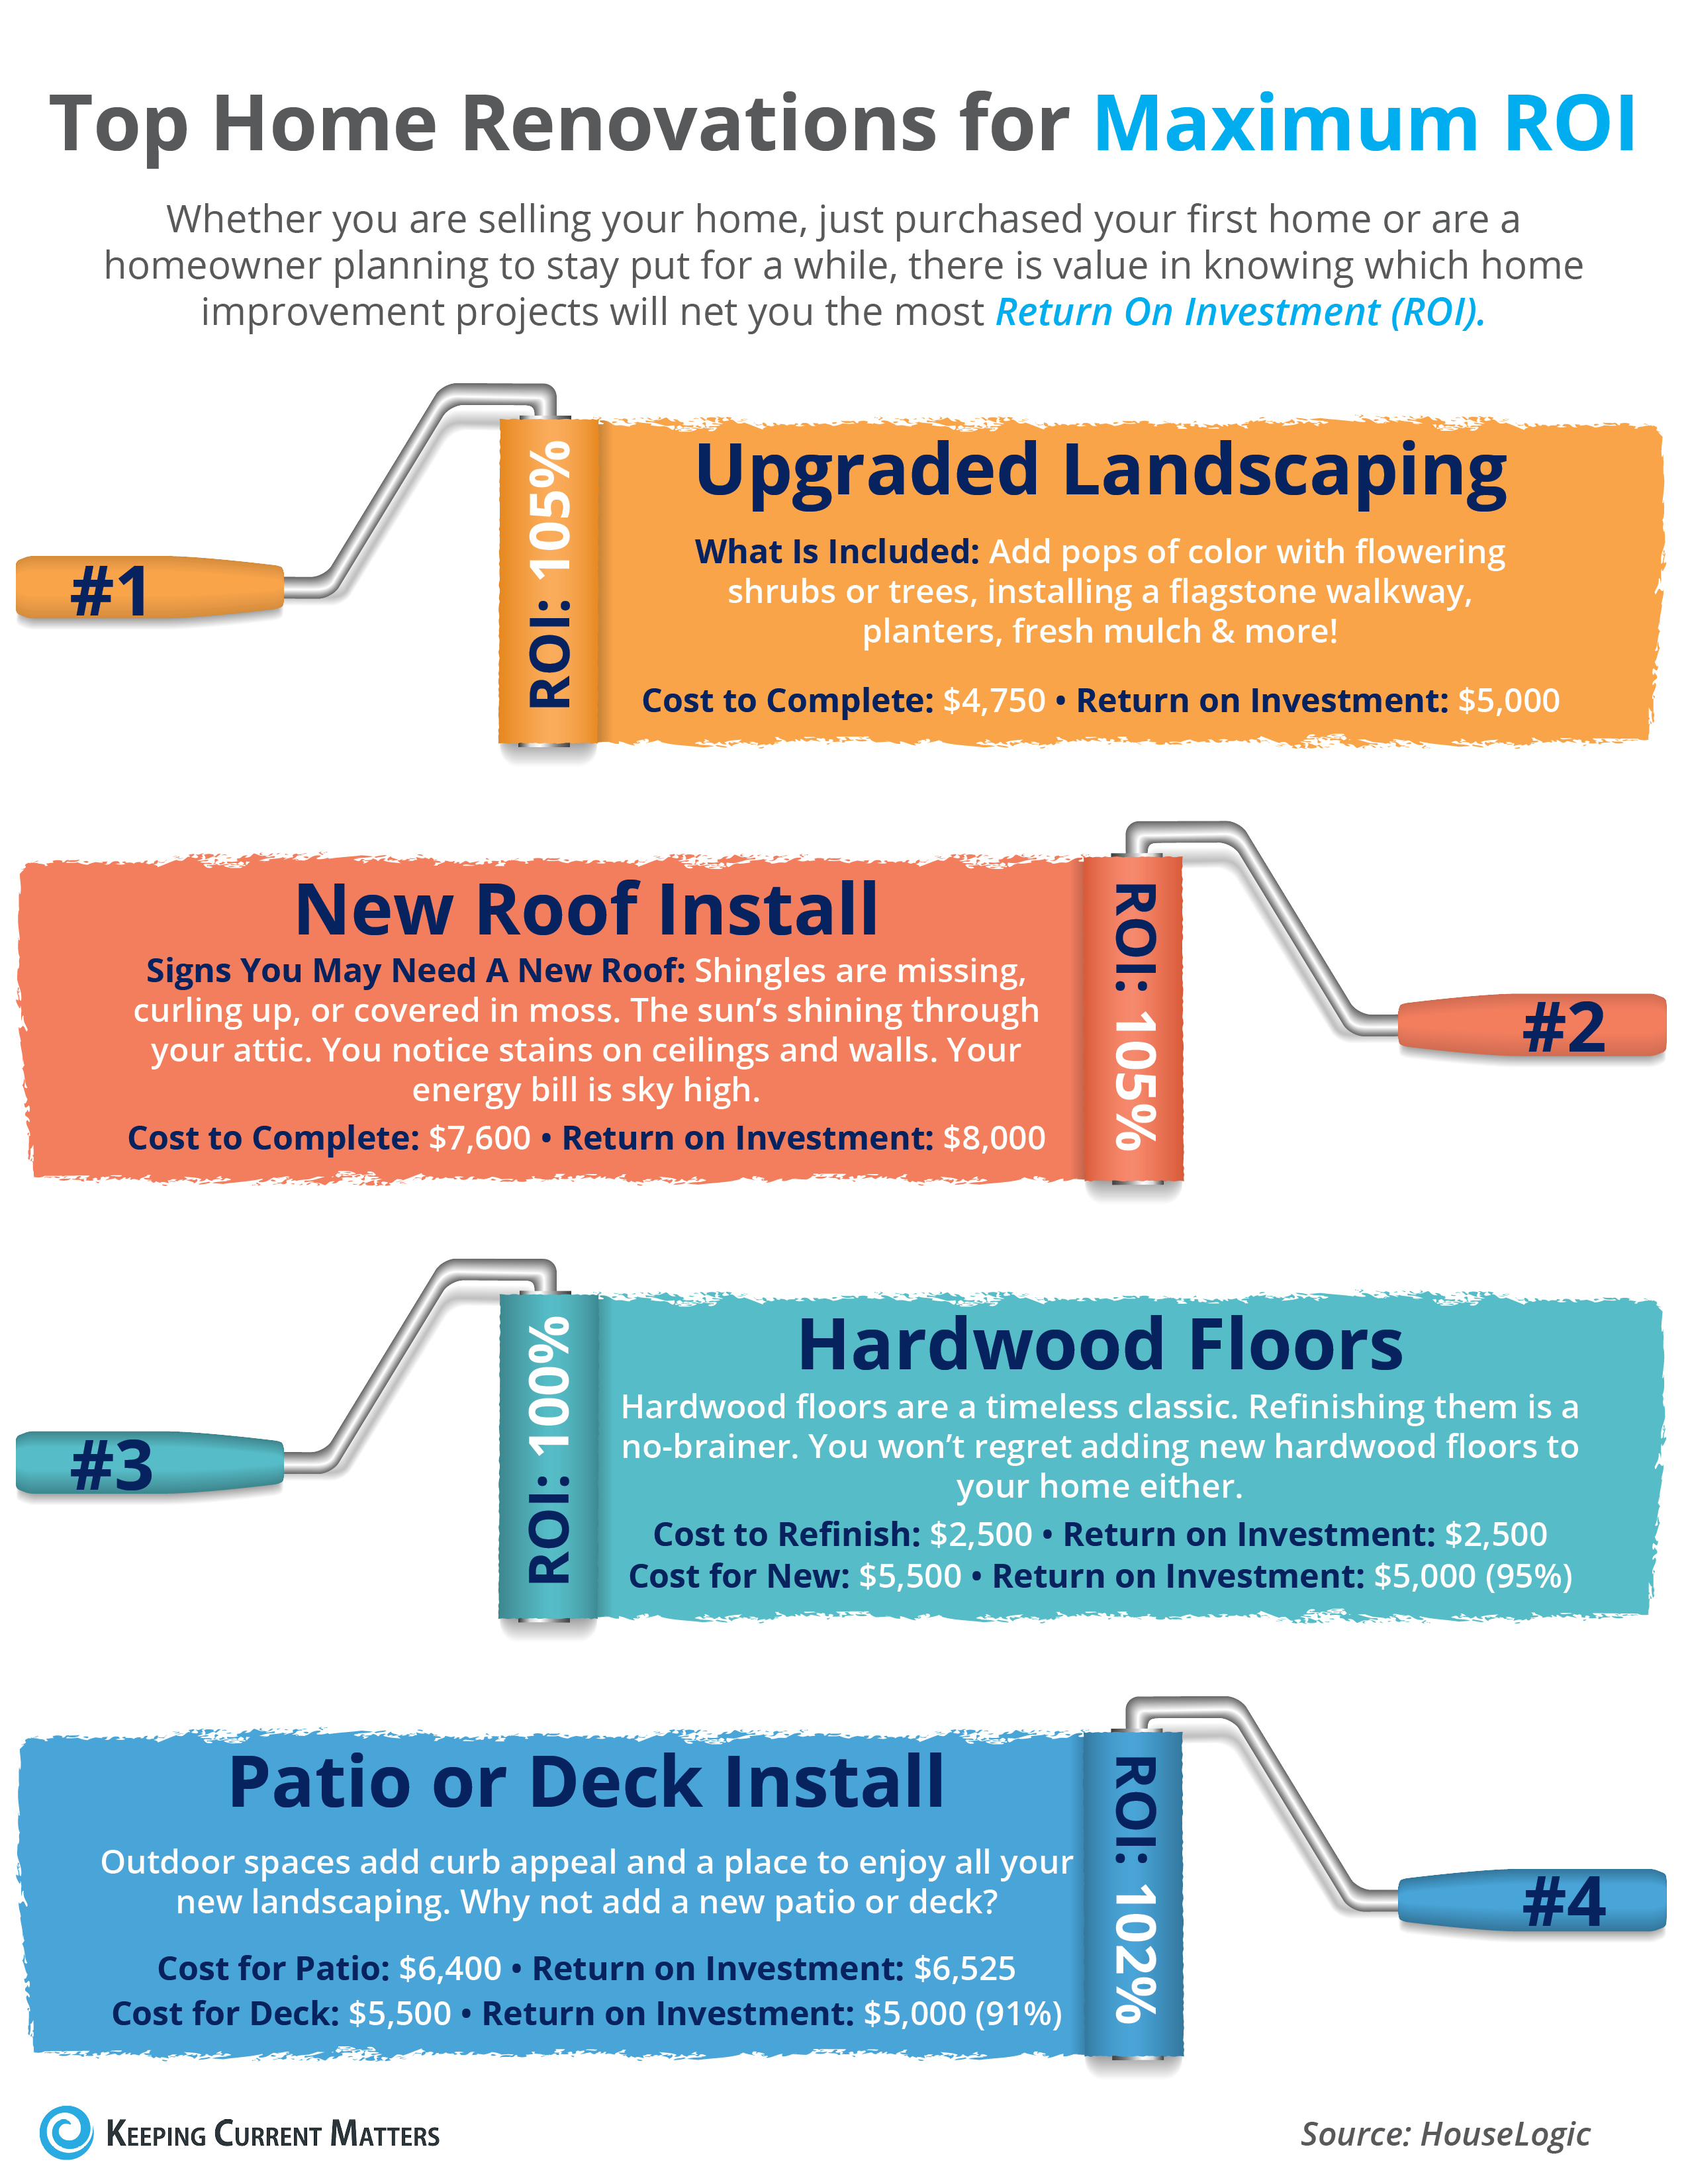 Top 4 Home Renovations for Maximum ROI [INFOGRAPHIC] | Keeping Current Matters